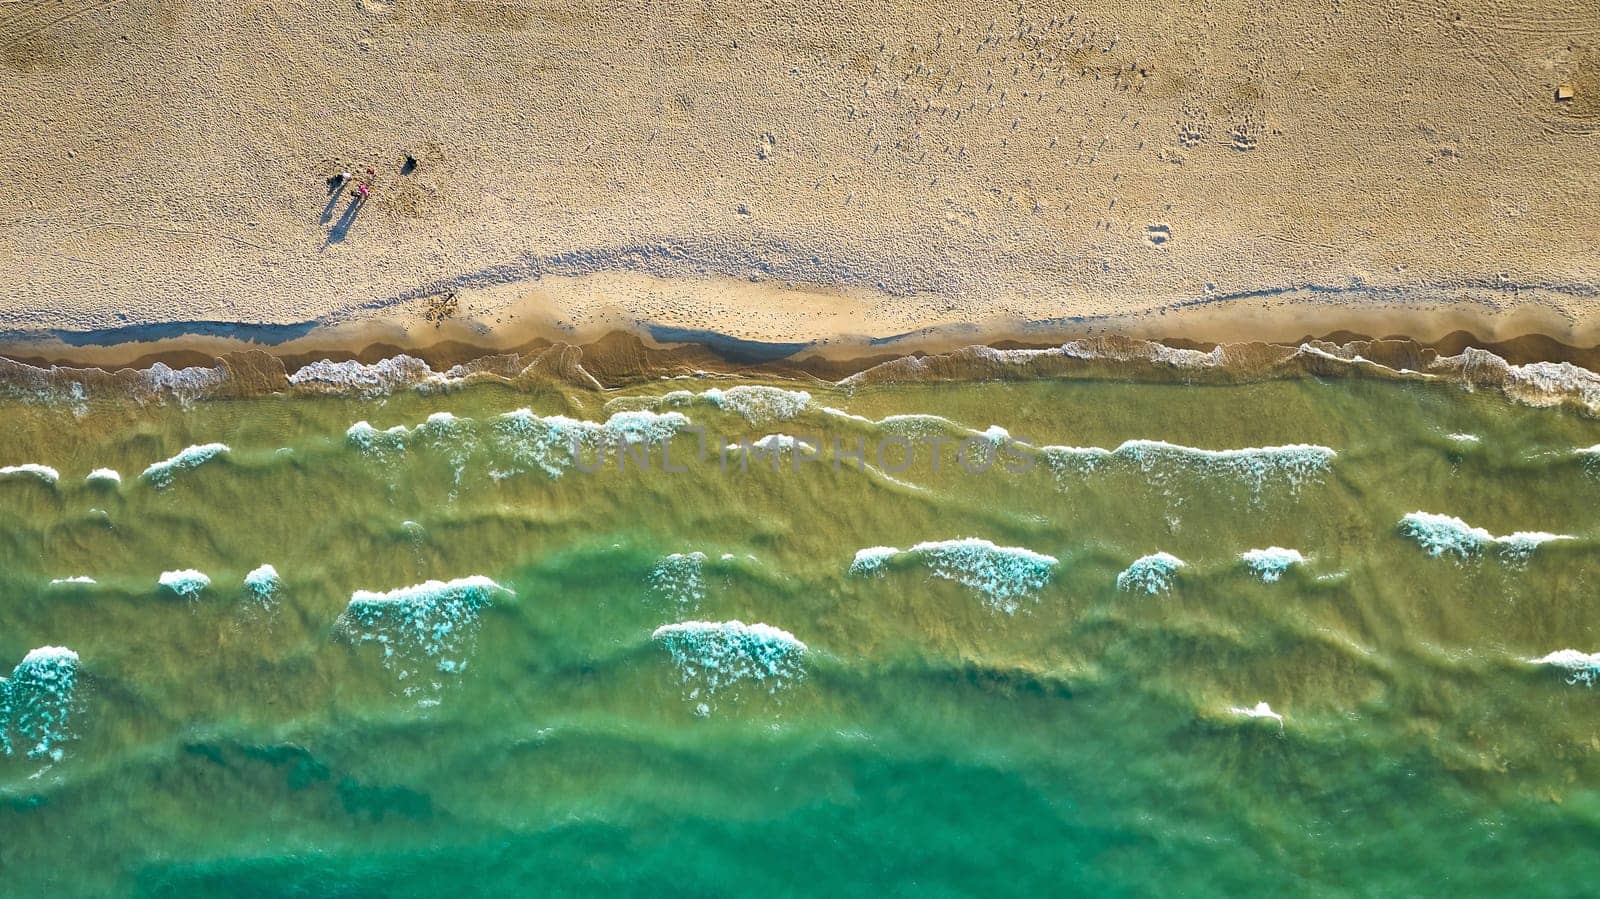 Aerial above green water waves on sunny day with beach along coast with tourists traveling on sand by njproductions